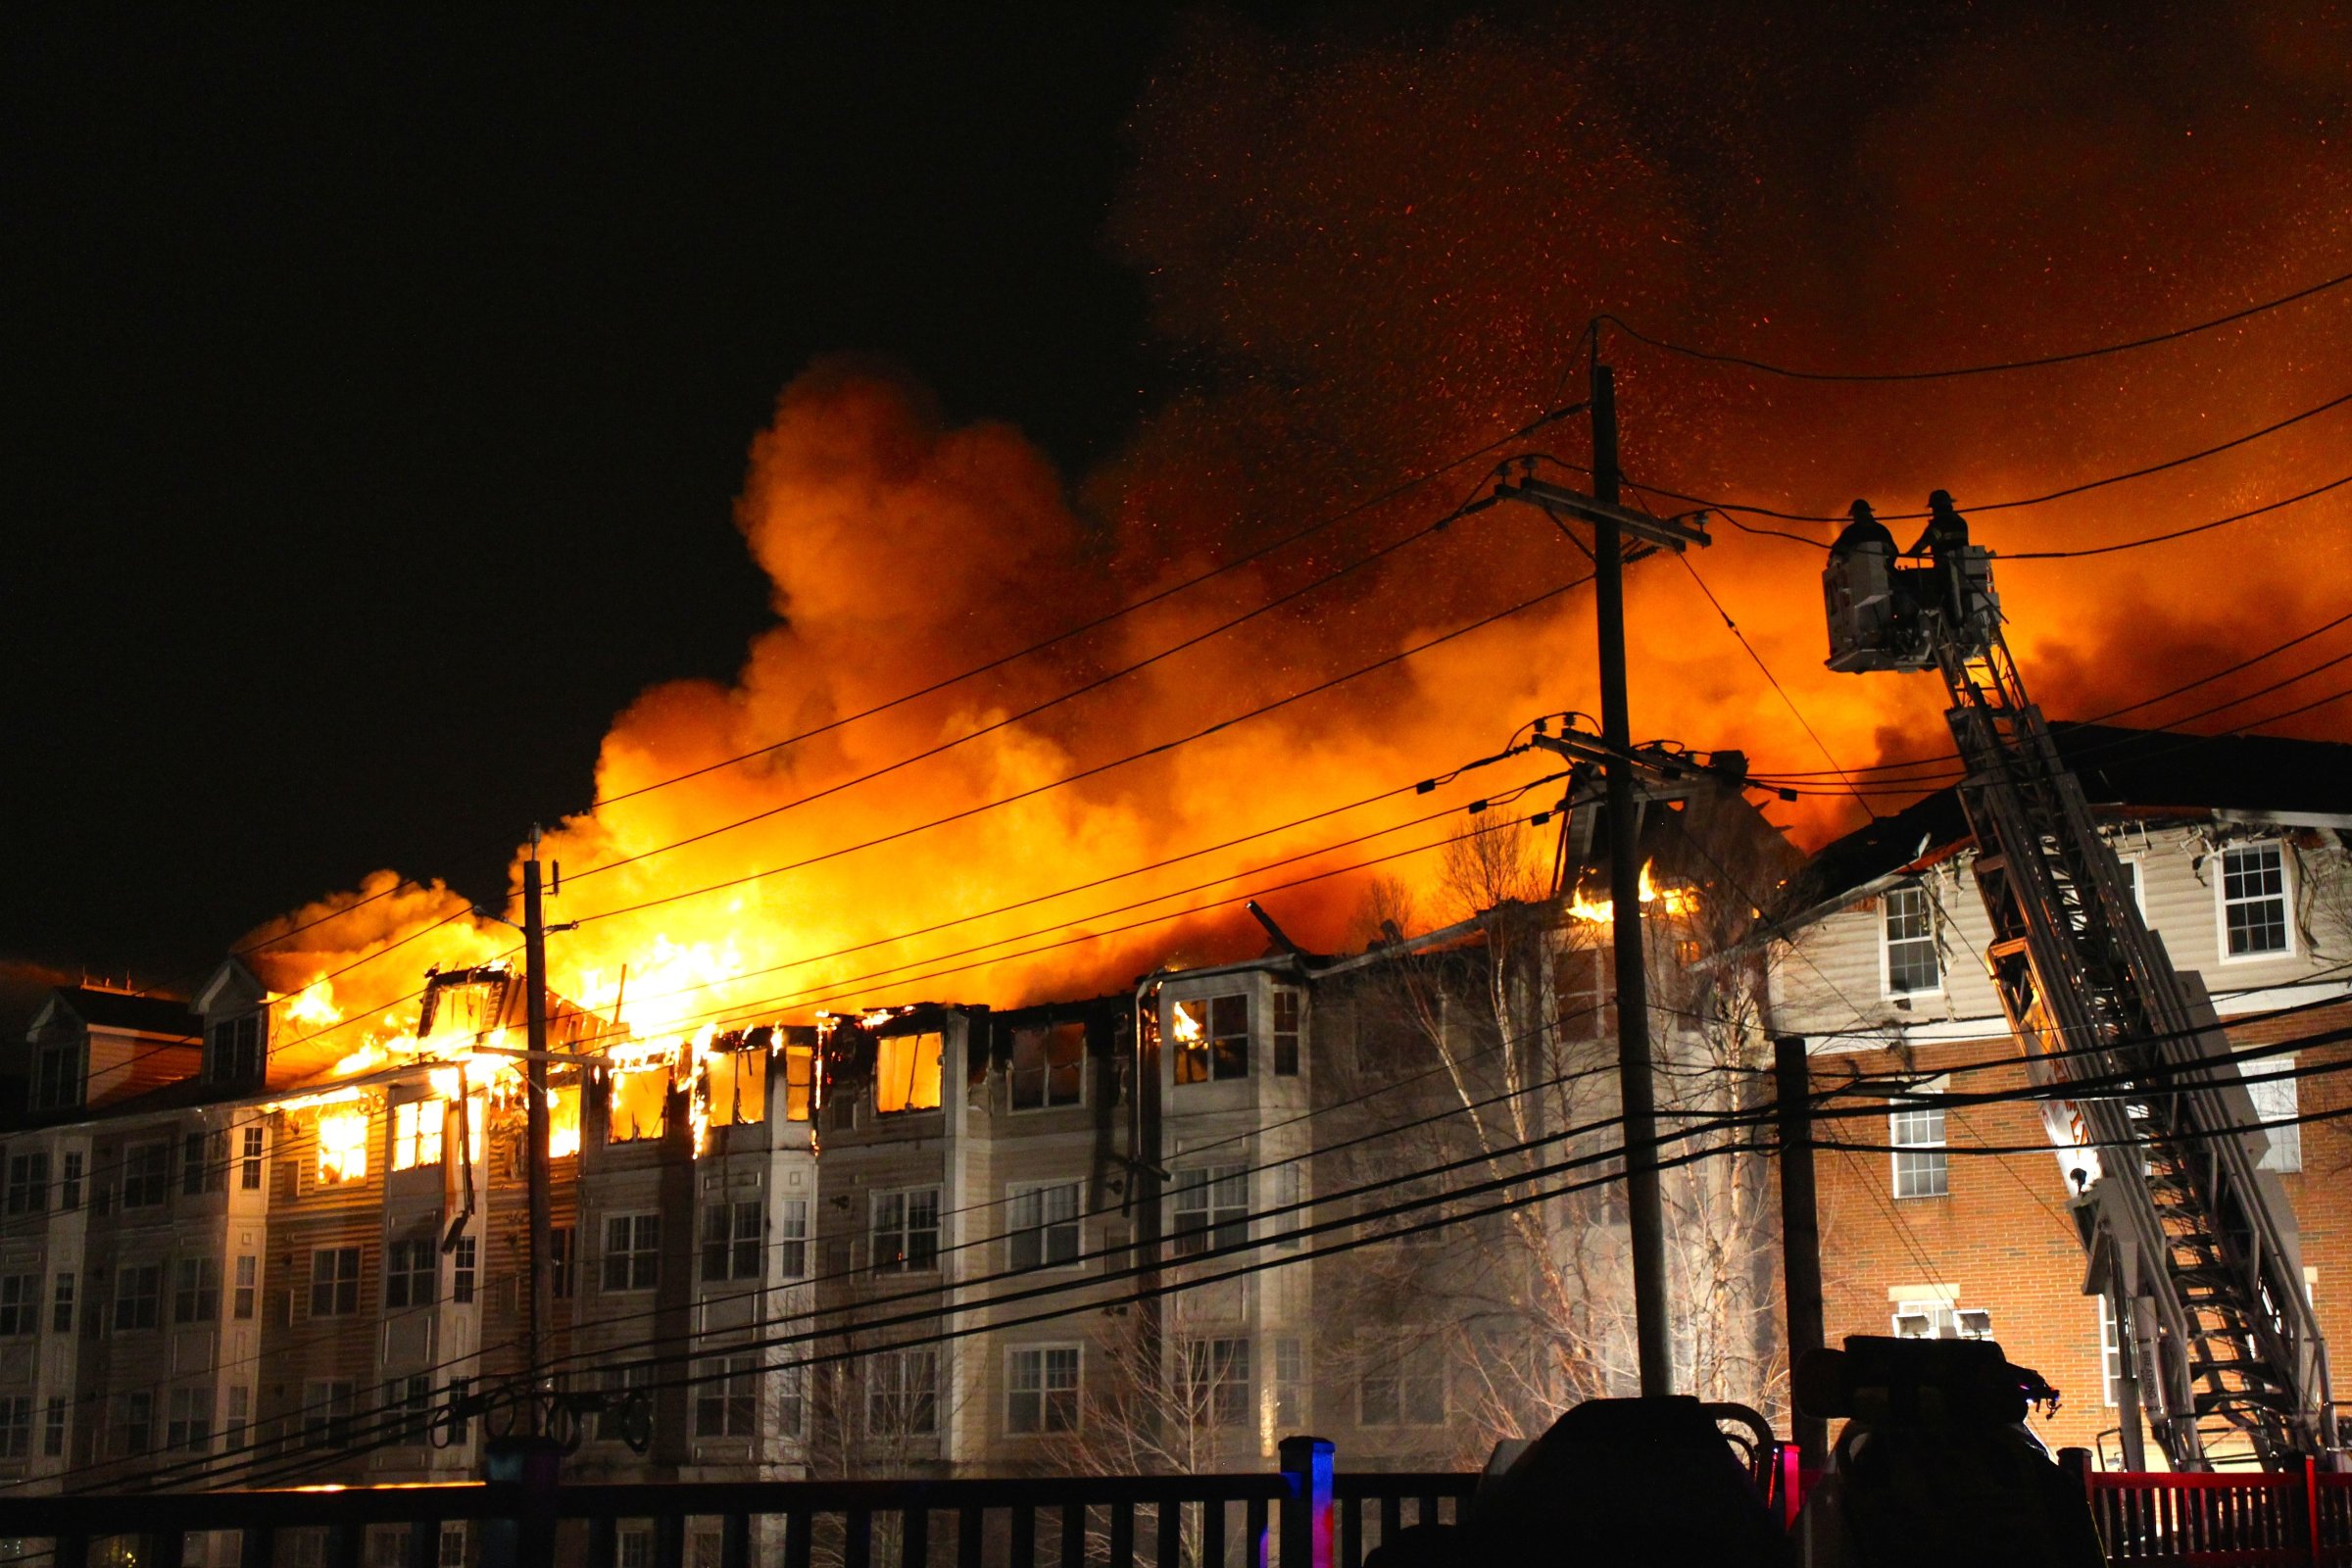 Massive fire at apartment complex in New Jersey